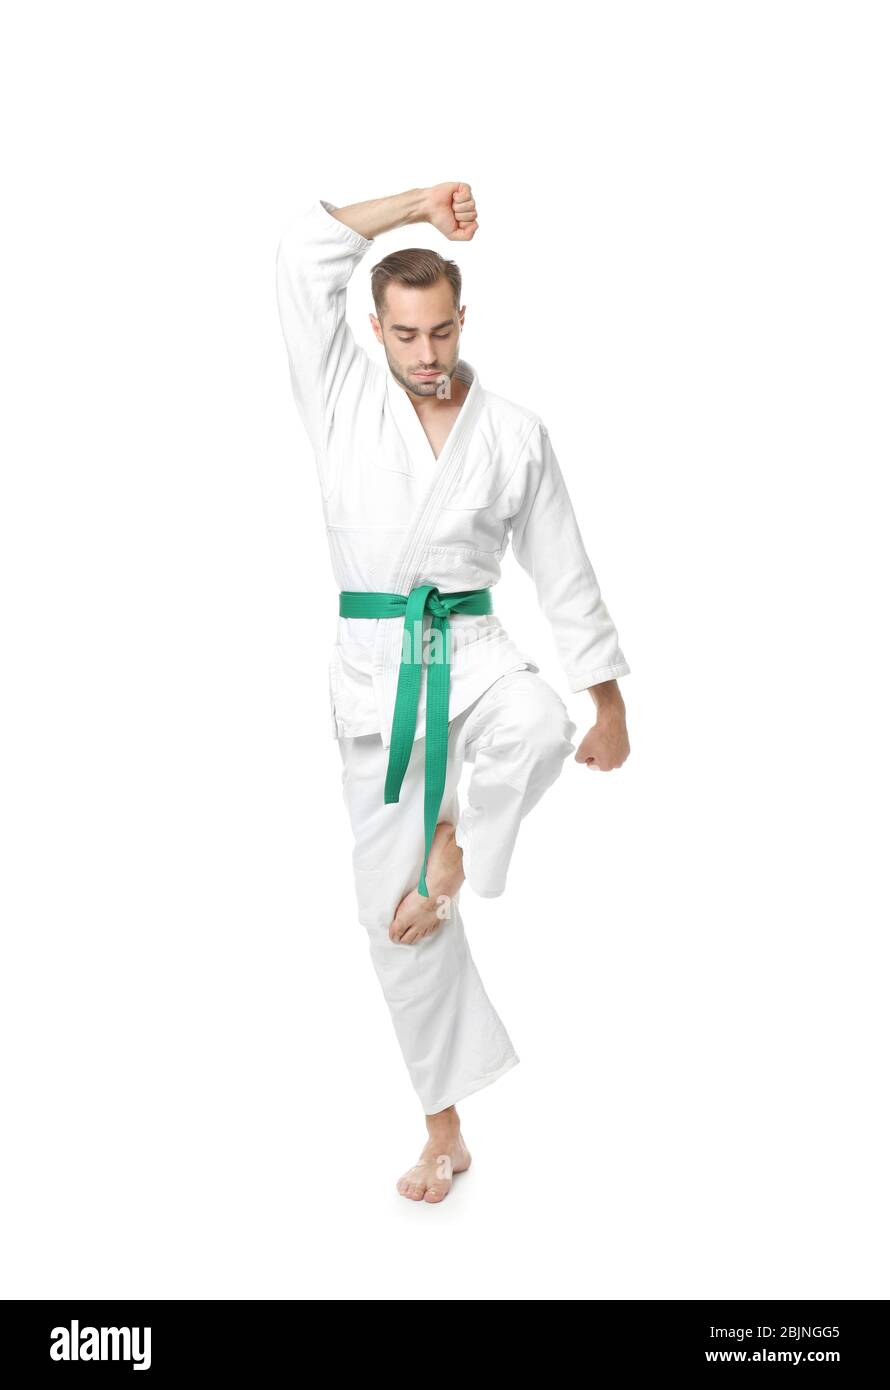 Young man practicing karate on white background Stock Photo